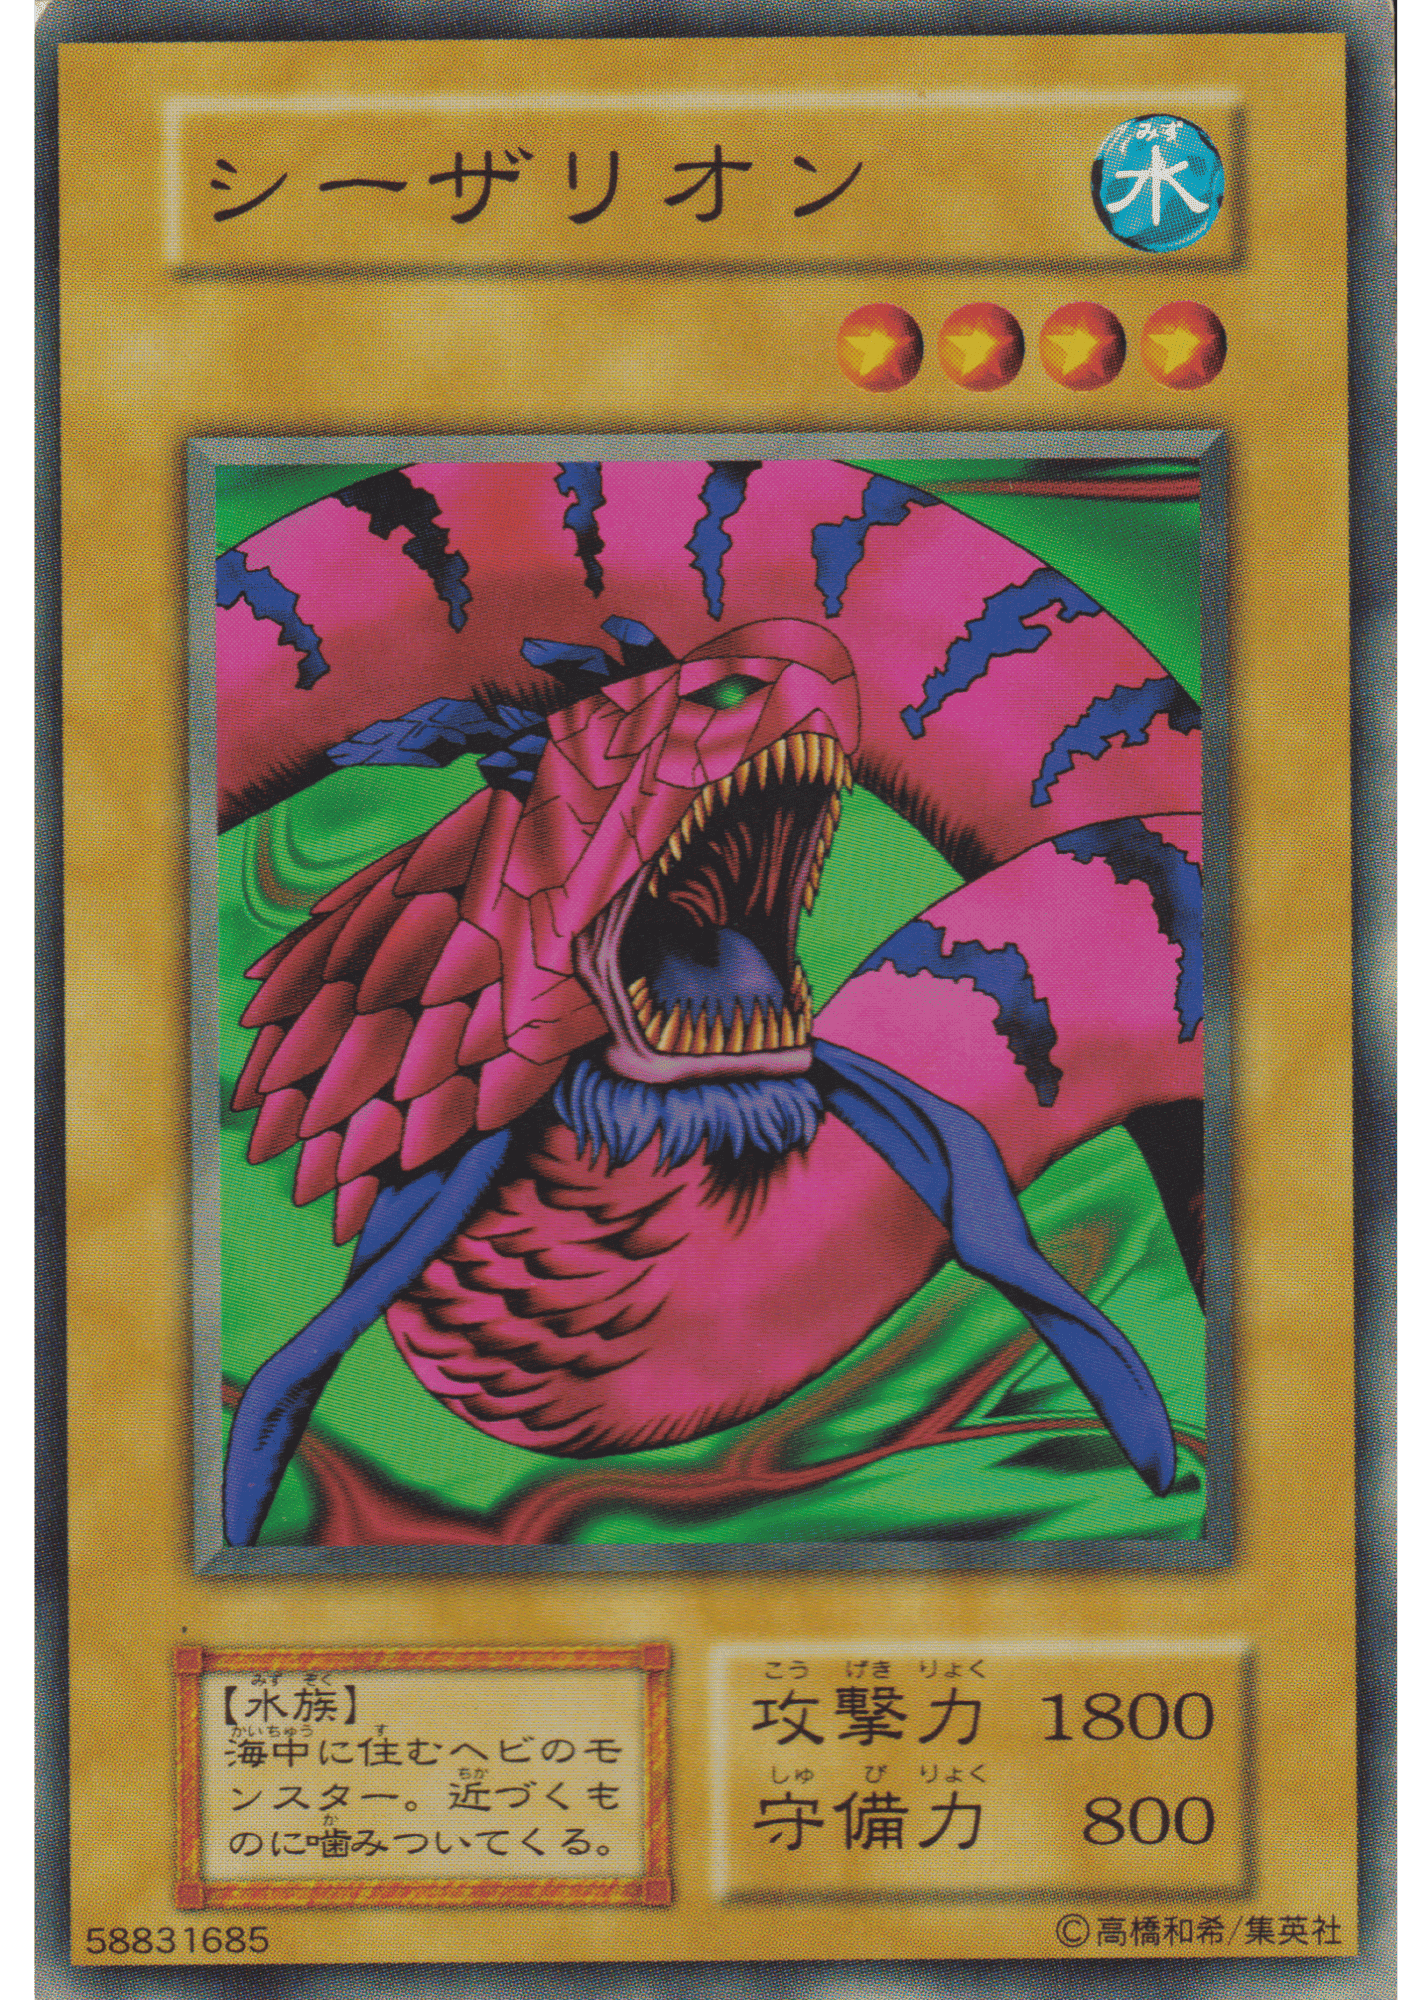 Giant Red Seasnake 58831685 (No ref) | Booster 4 ChitoroShop